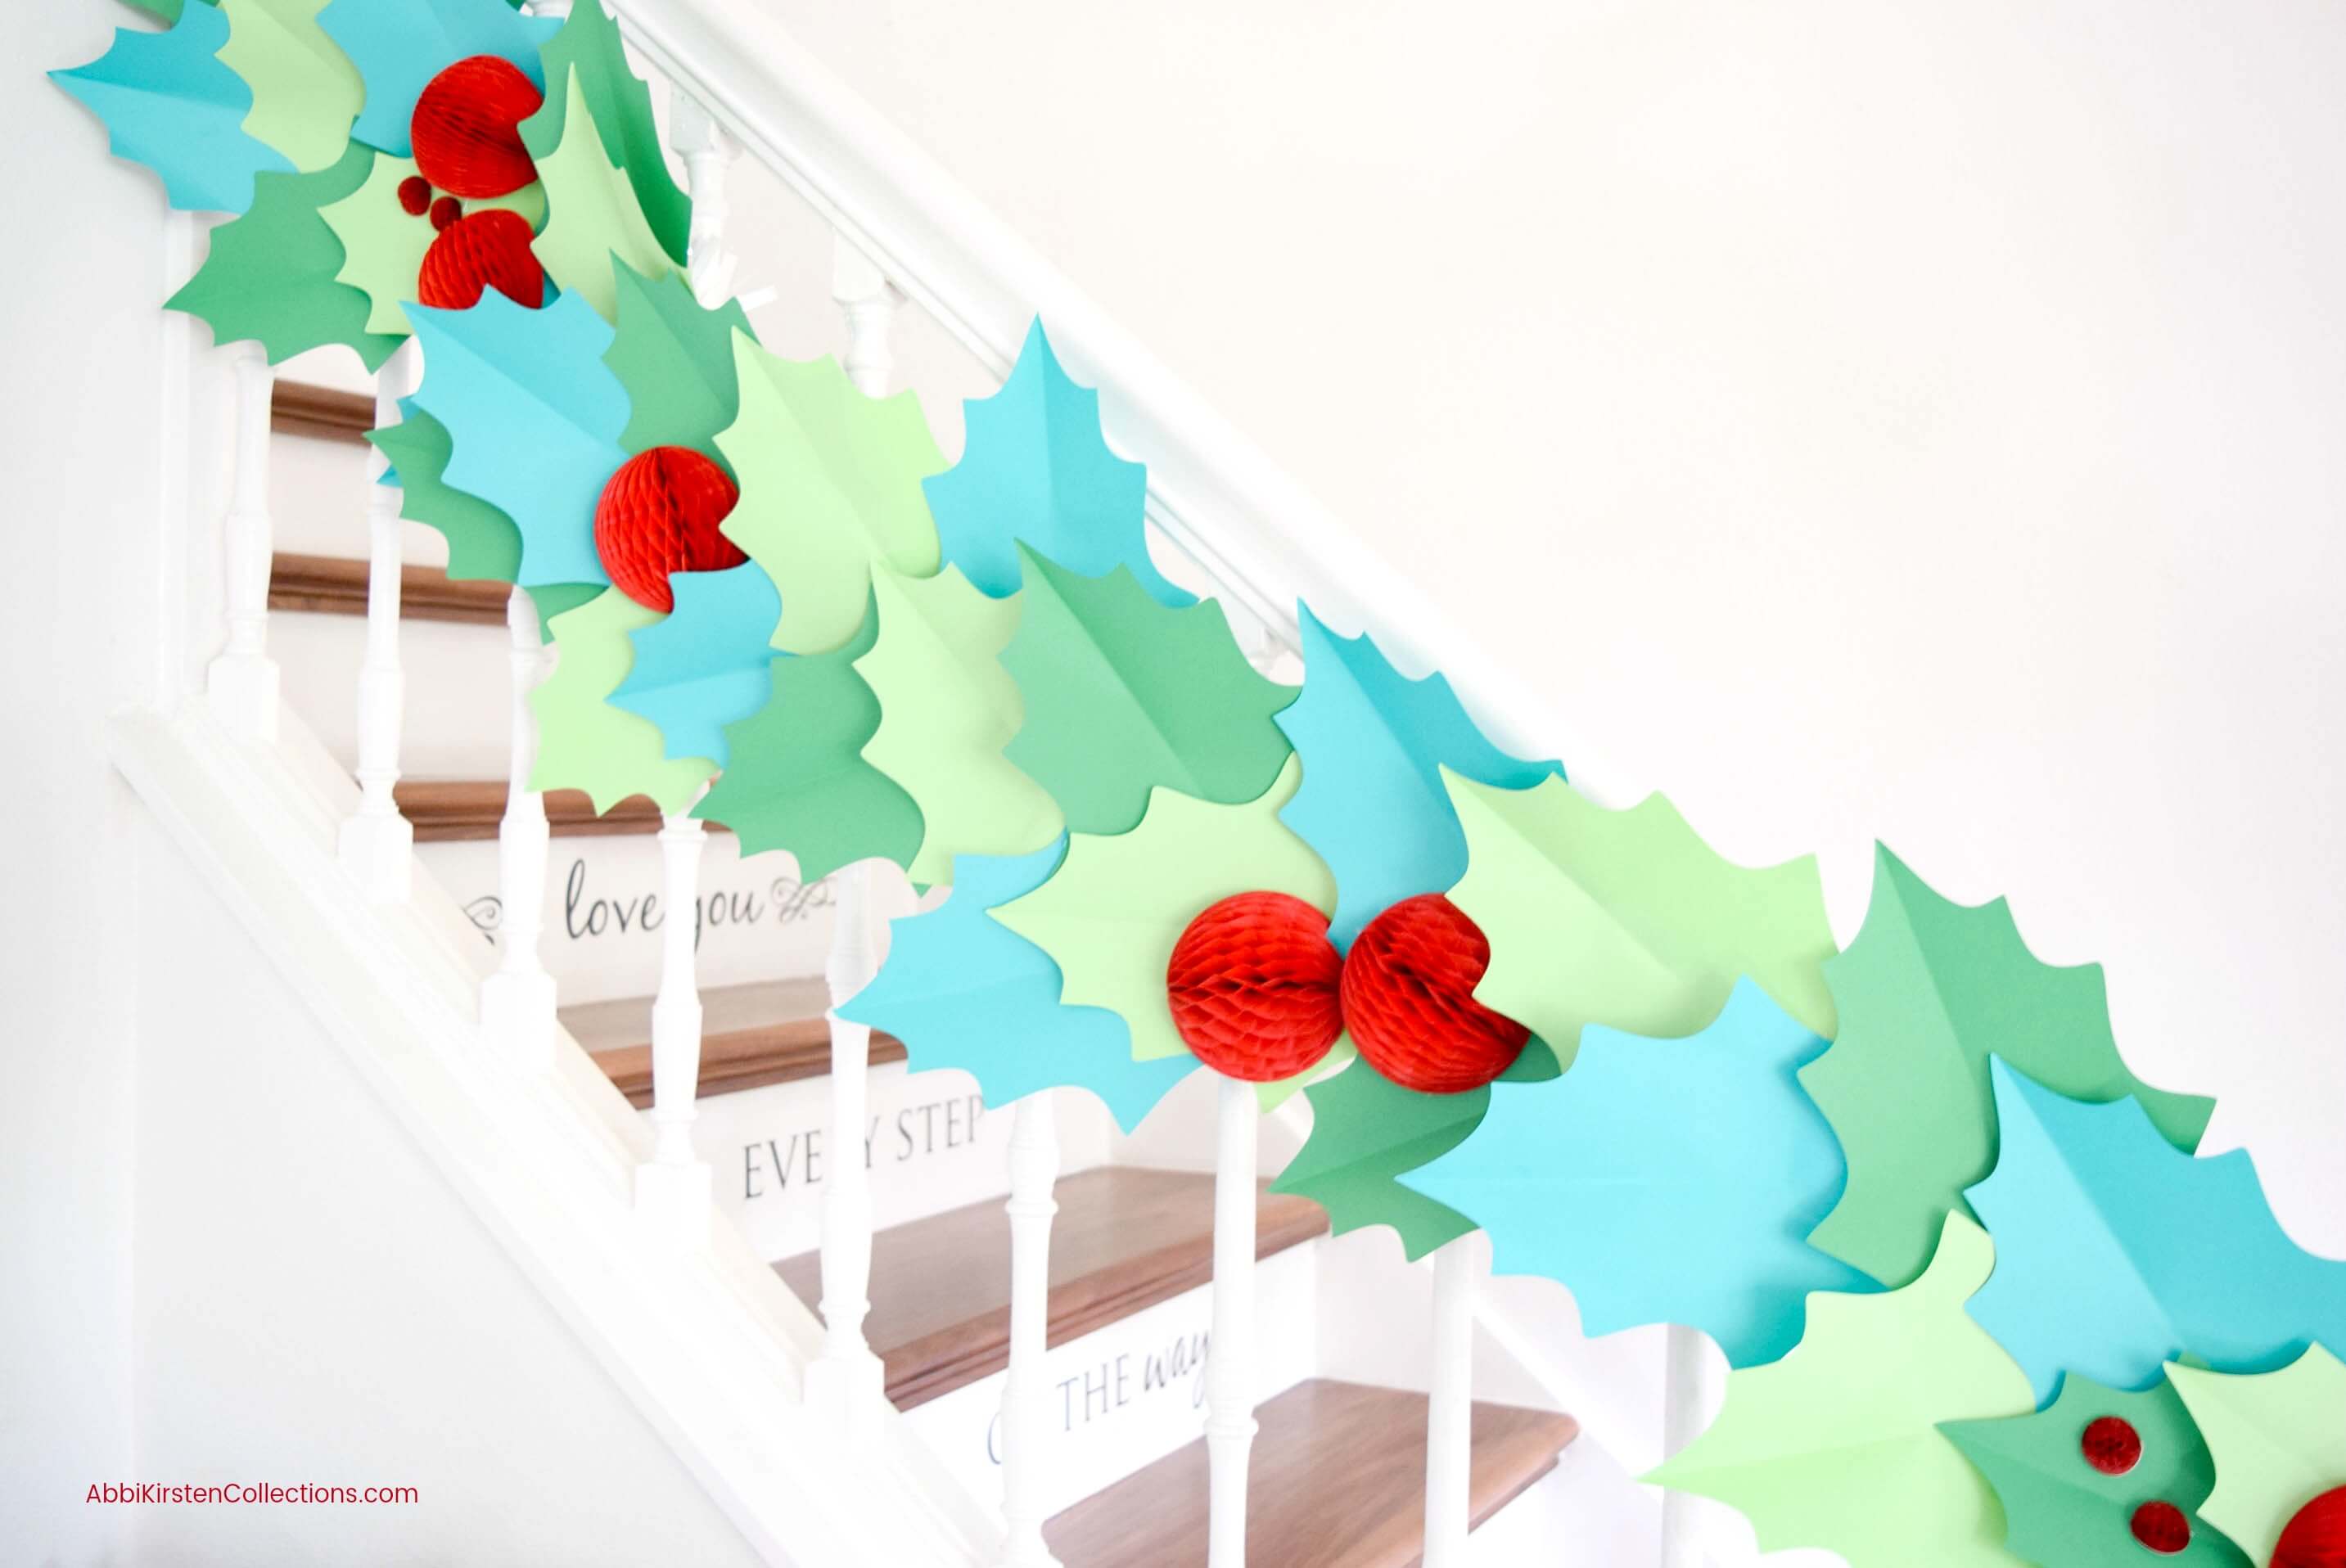 DIY Christmas Garland – How to Make Giant Paper Holly Garland